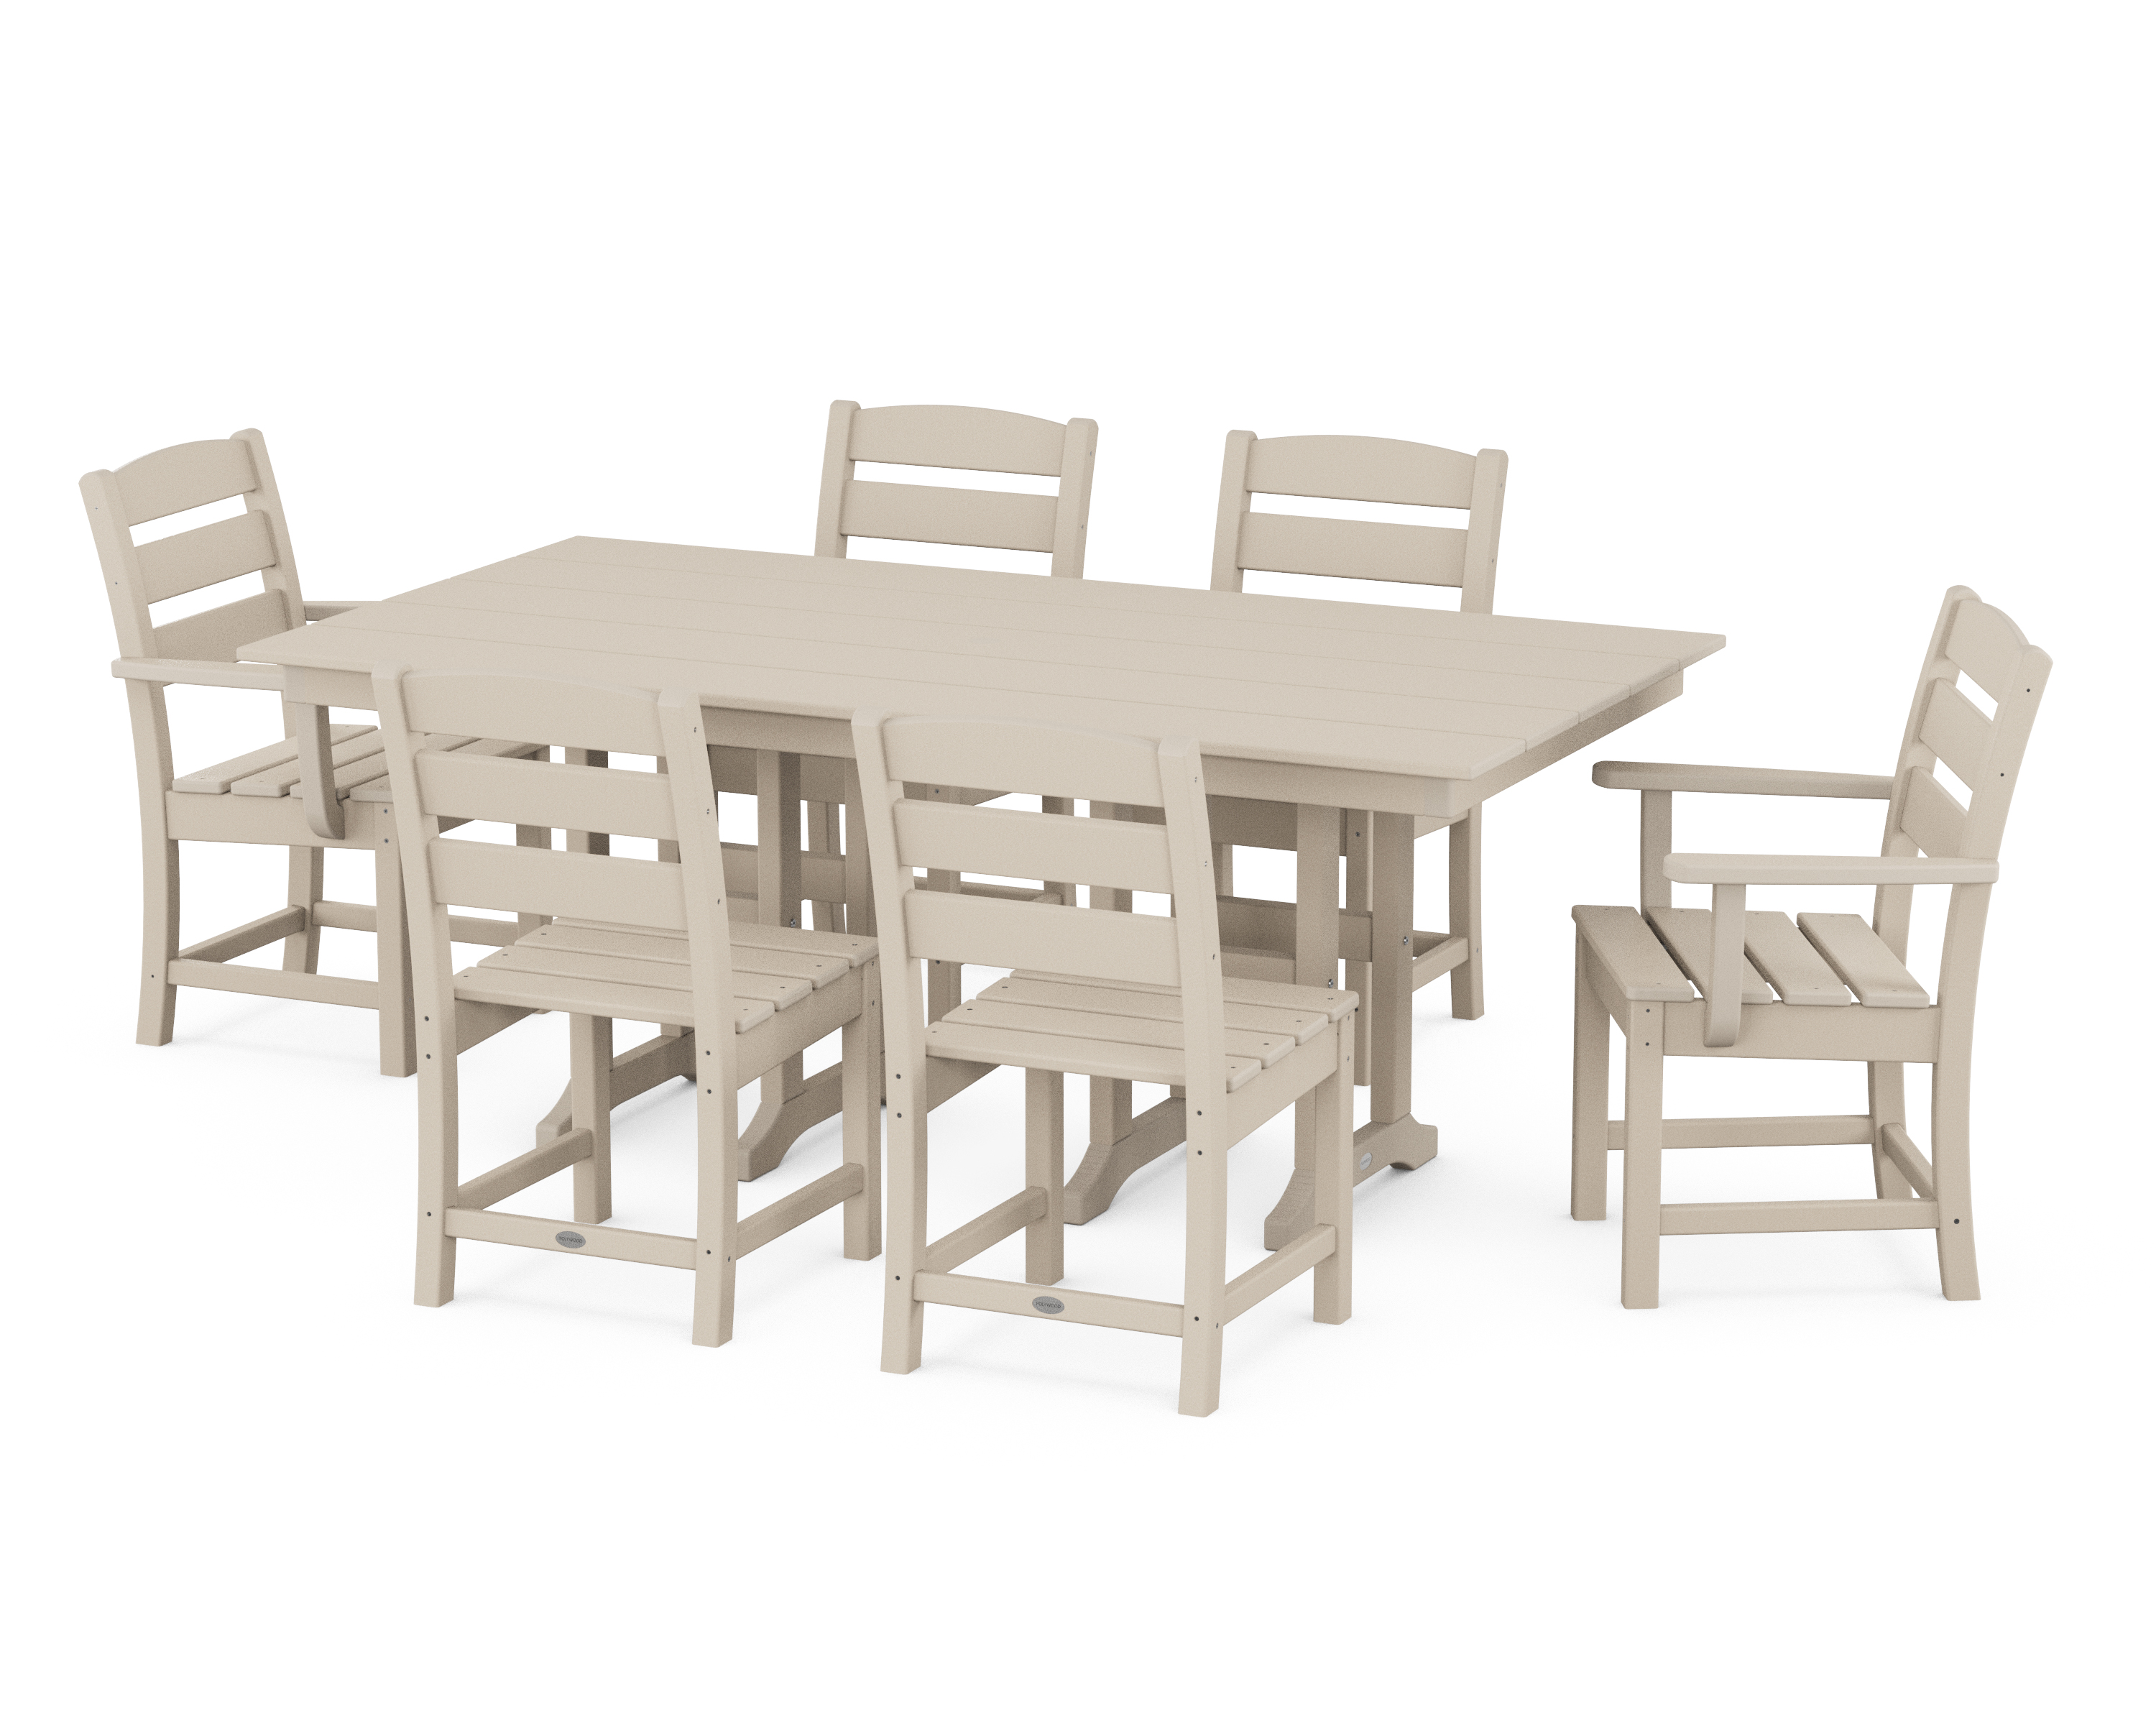 POLYWOOD Lakeside 7-Piece Farmhouse Dining Set in Sand - image 1 of 1